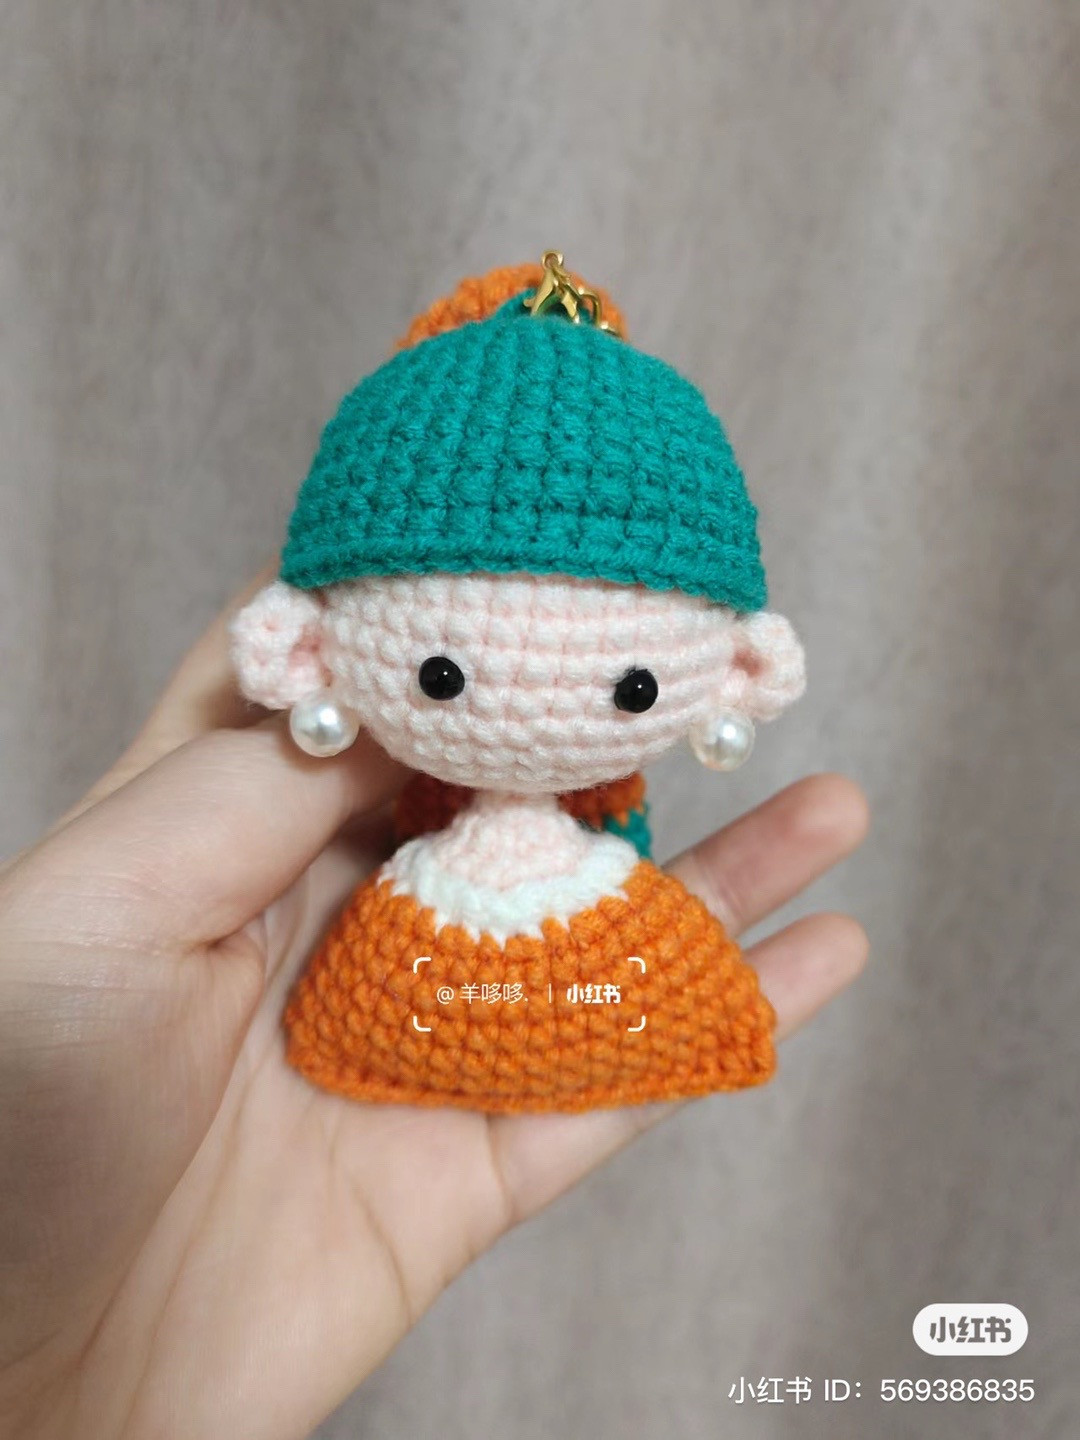 Pattern for crocheting keychains on baby girl dolls